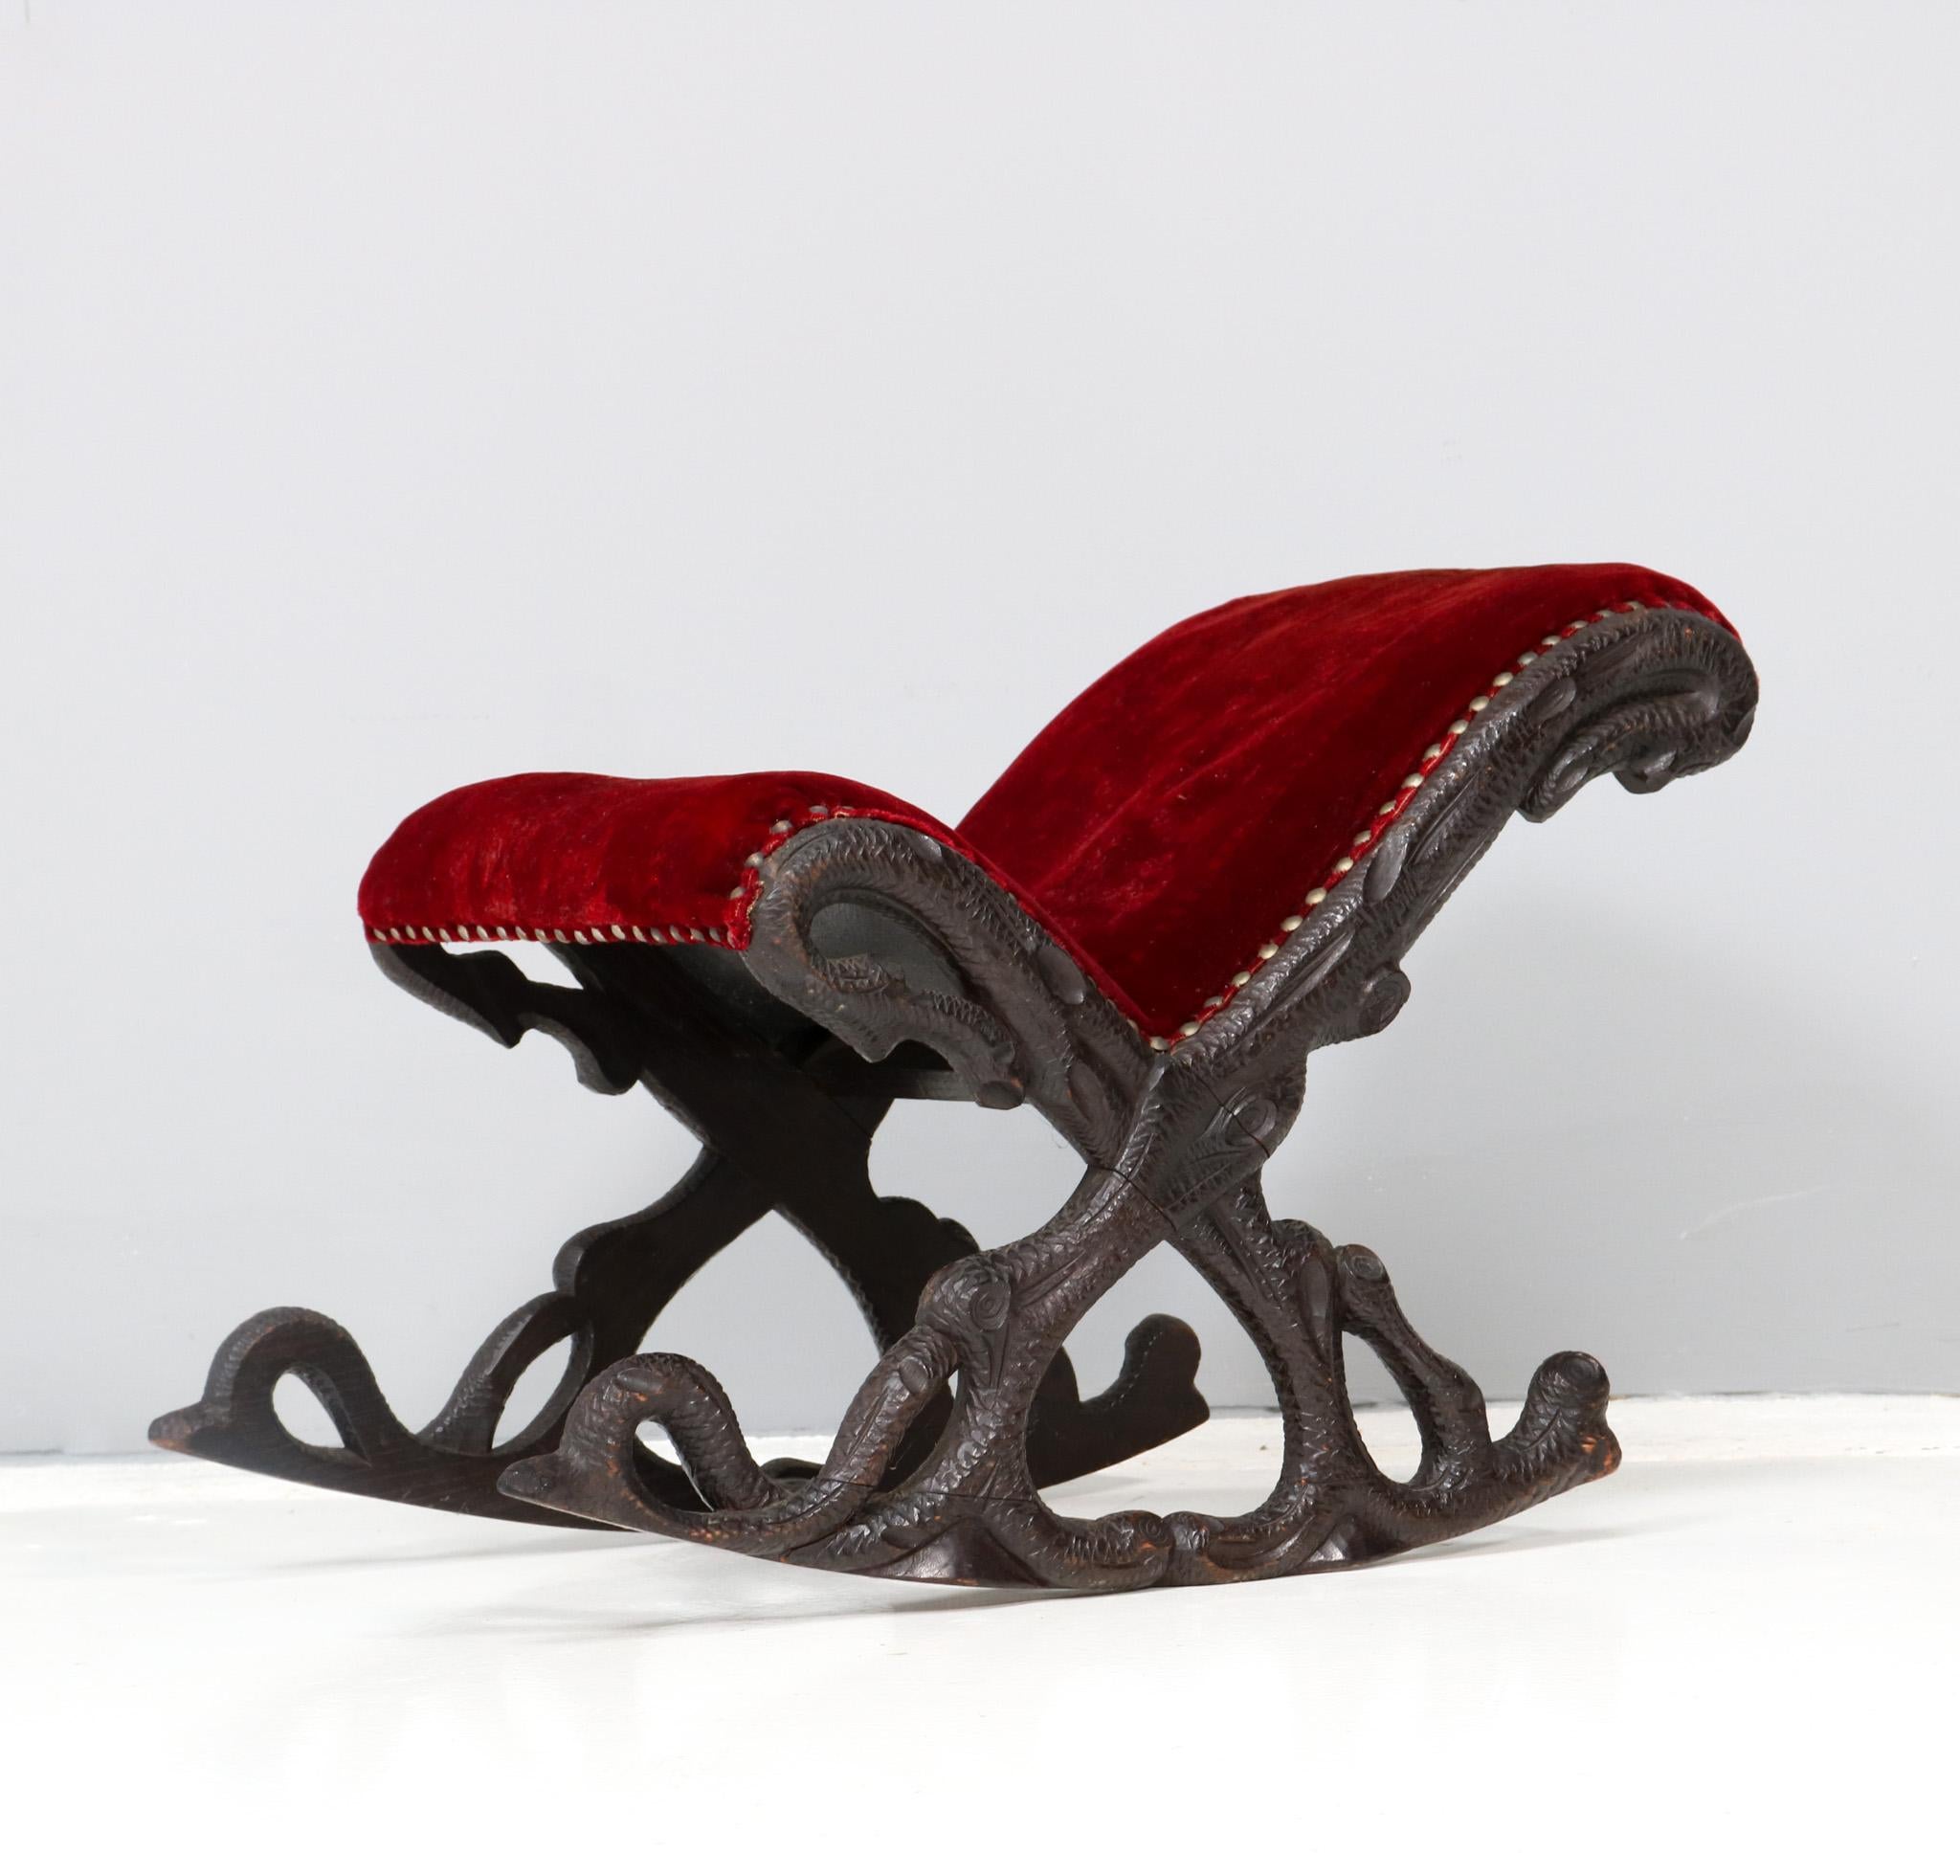 Magnificent and ultra rare Black Forest footstool. Design attributed to Matthijs Horrix for the famous Dutch cabinet makers Horrix Den Haag. Striking Dutch design from the 1880s. Solid hand-carved walnut base and re-upholstered with a quality velvet